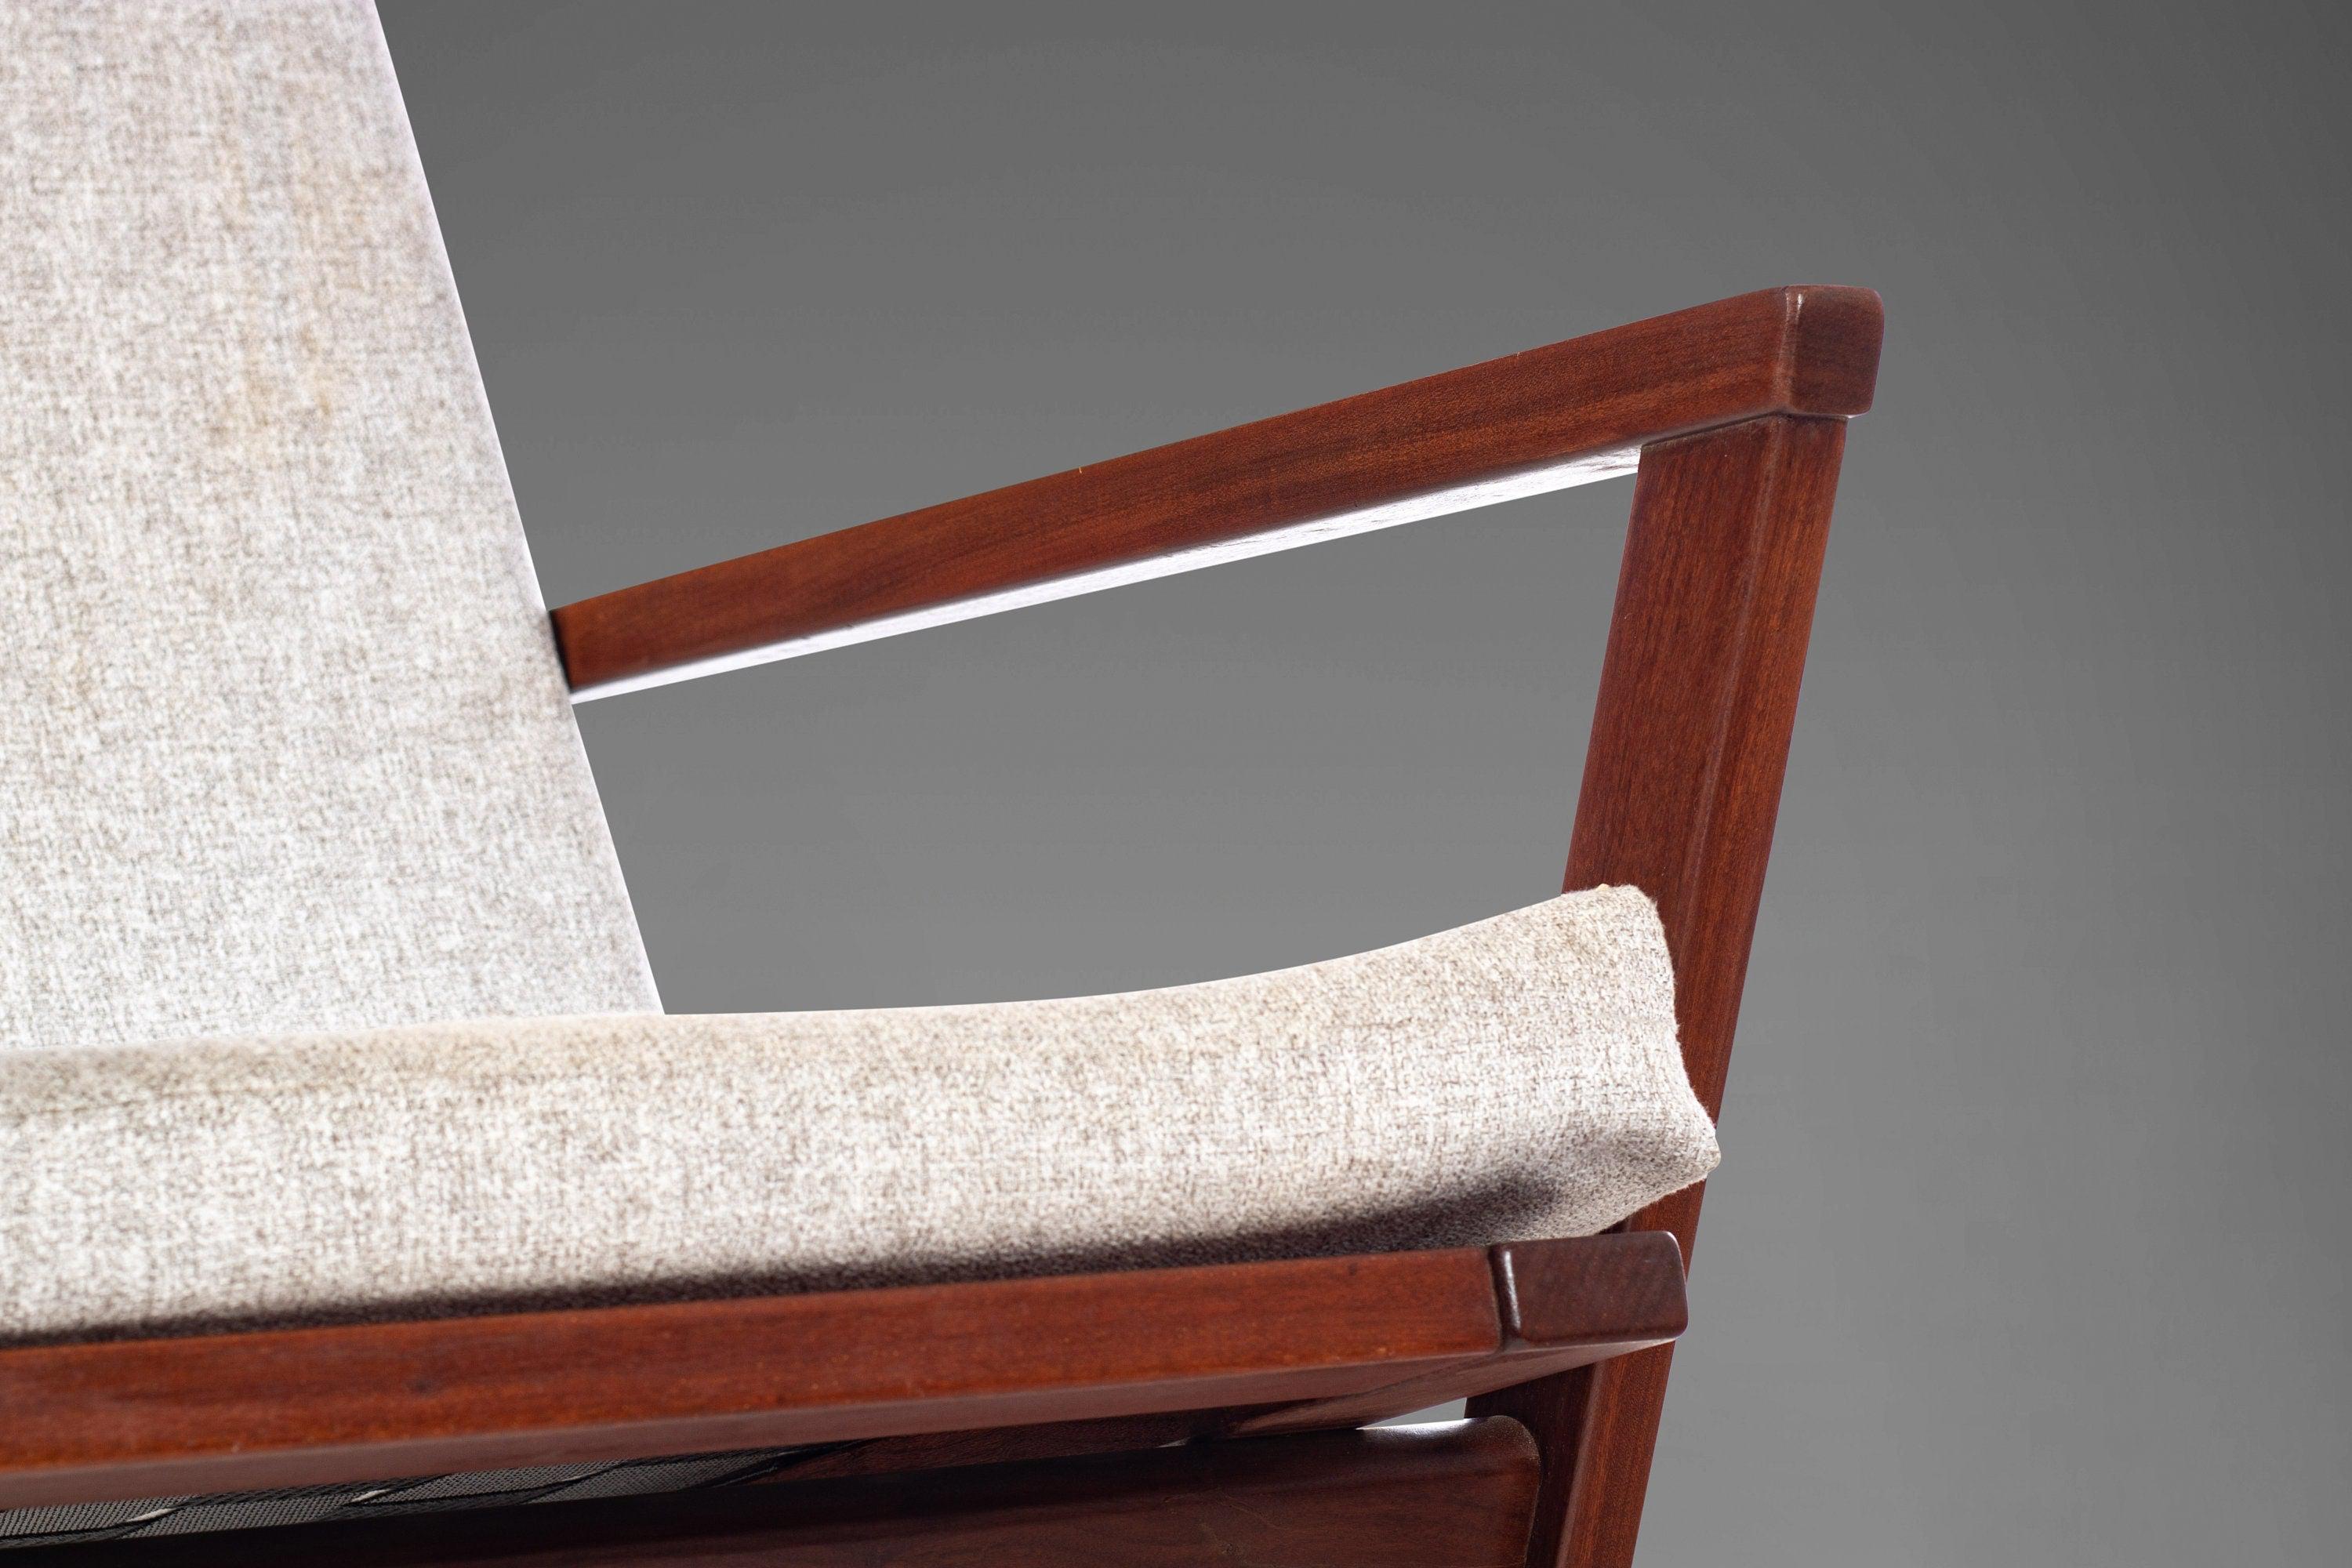 Mid-20th Century Rocking Chair by Poul Volther for Frem Rojle in Afromosia, New Fabric, c. 1960s For Sale